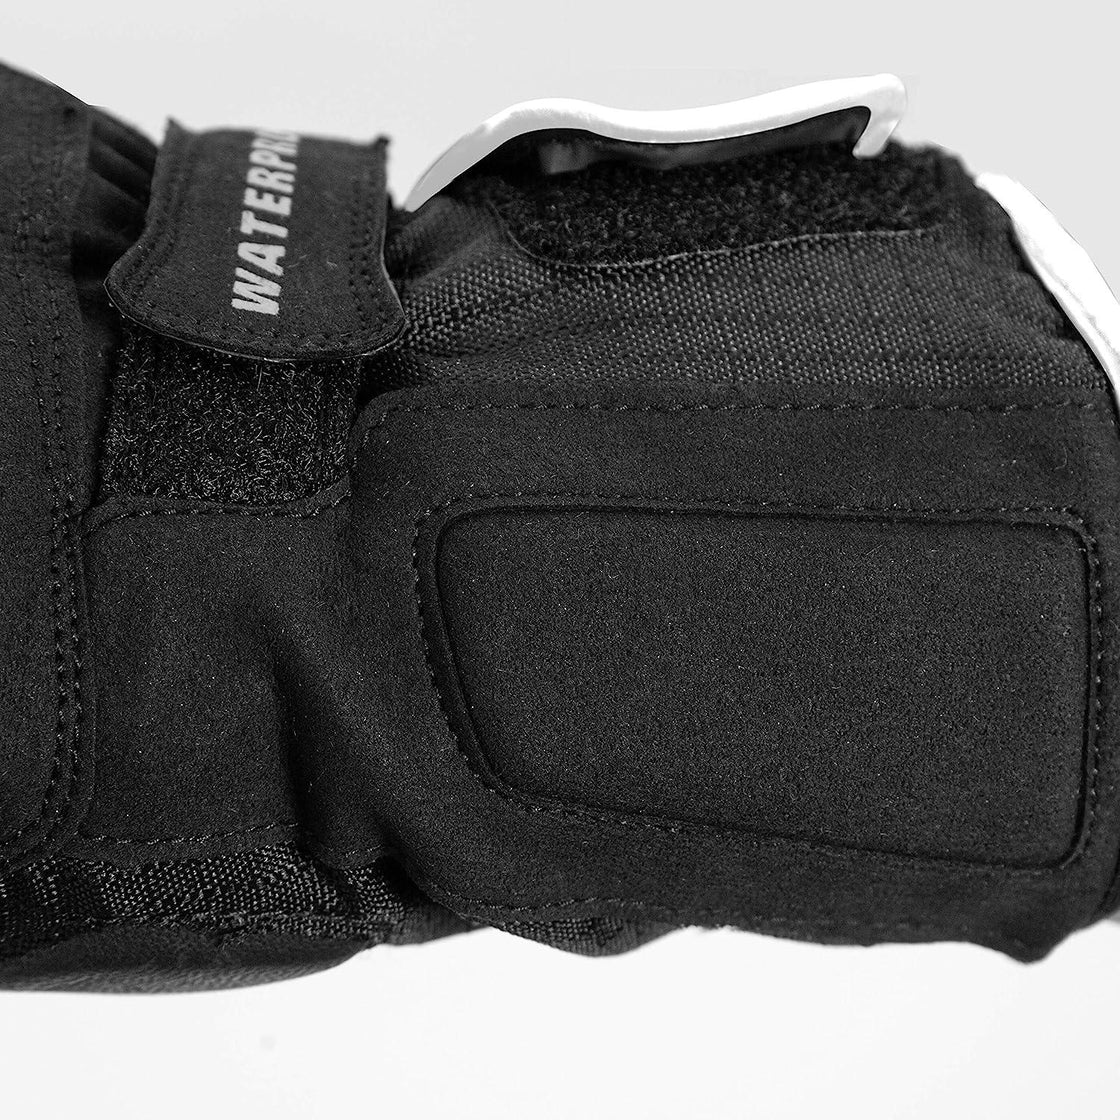 Seibertron™ SPW2 Carbon fiber Waterproof Touchscreen Leather Gloves - Bean's Moto Booth